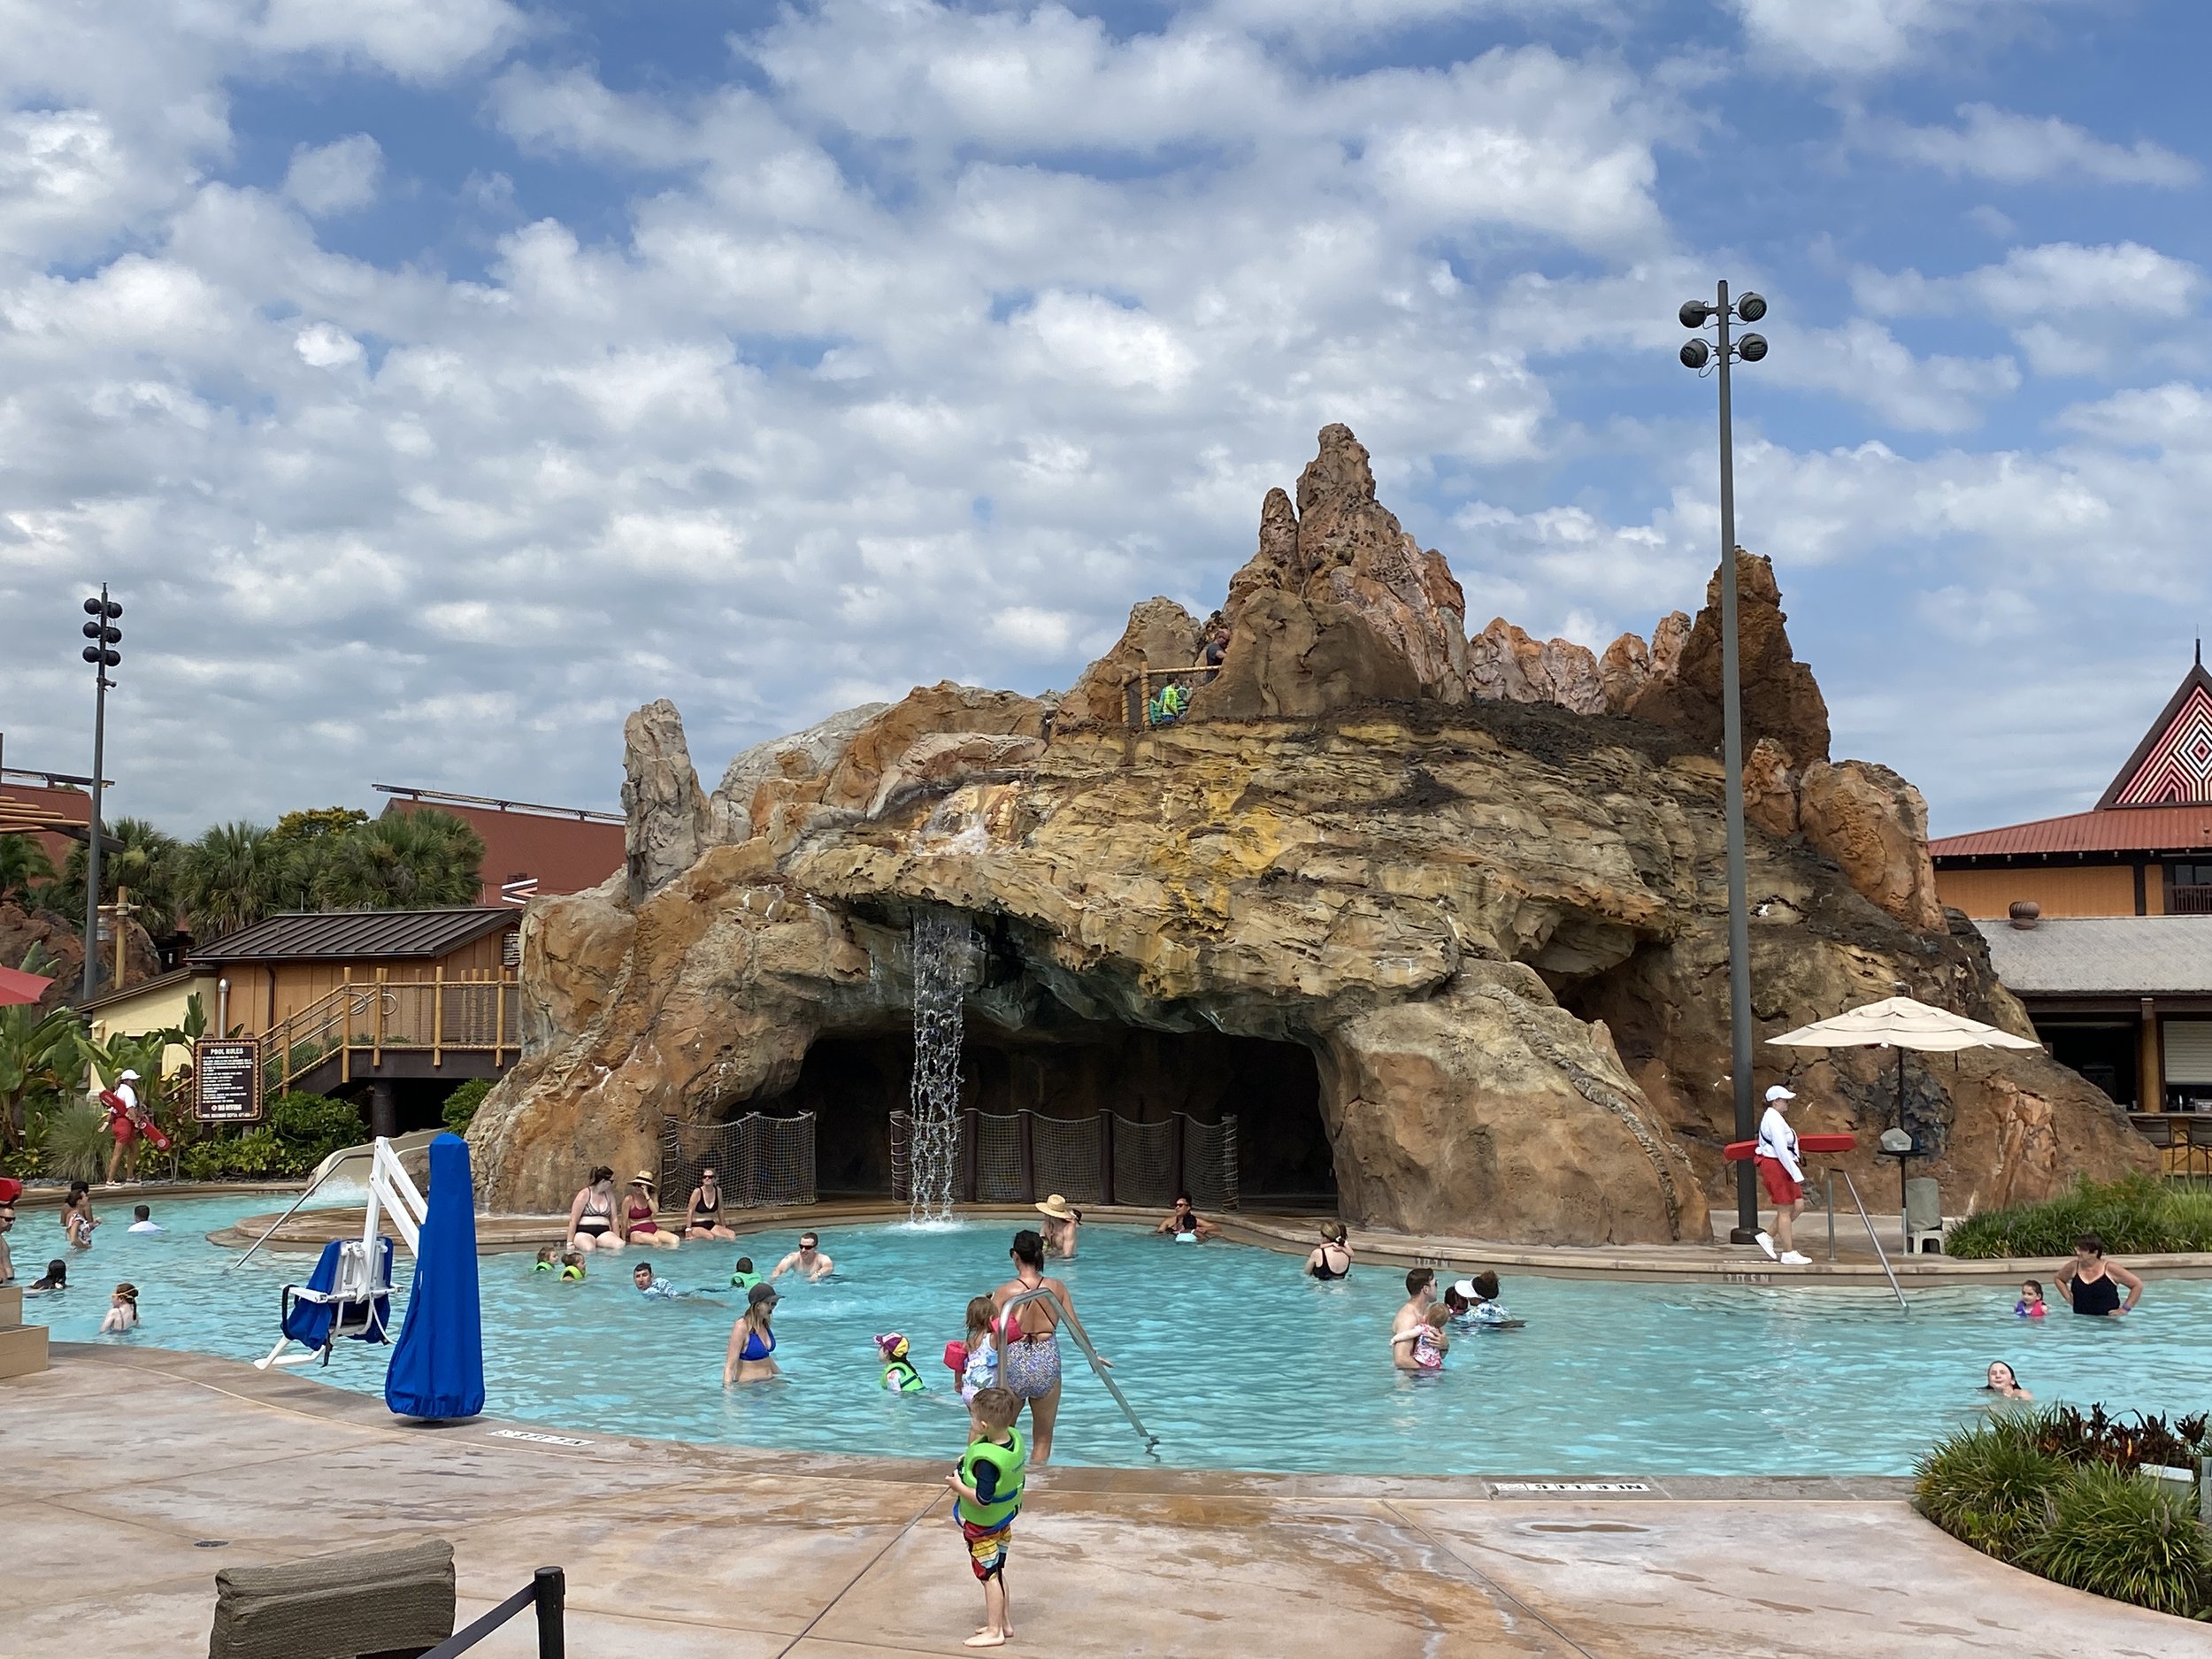  There are two pools, the Volcano Pool, also known as the Lava Pool, pictured here and the Oasis Pool pictured below.     The Volcano Pool has a waterslide, children’s playscape, afternoon music and entertainment, and poolside bar service.   